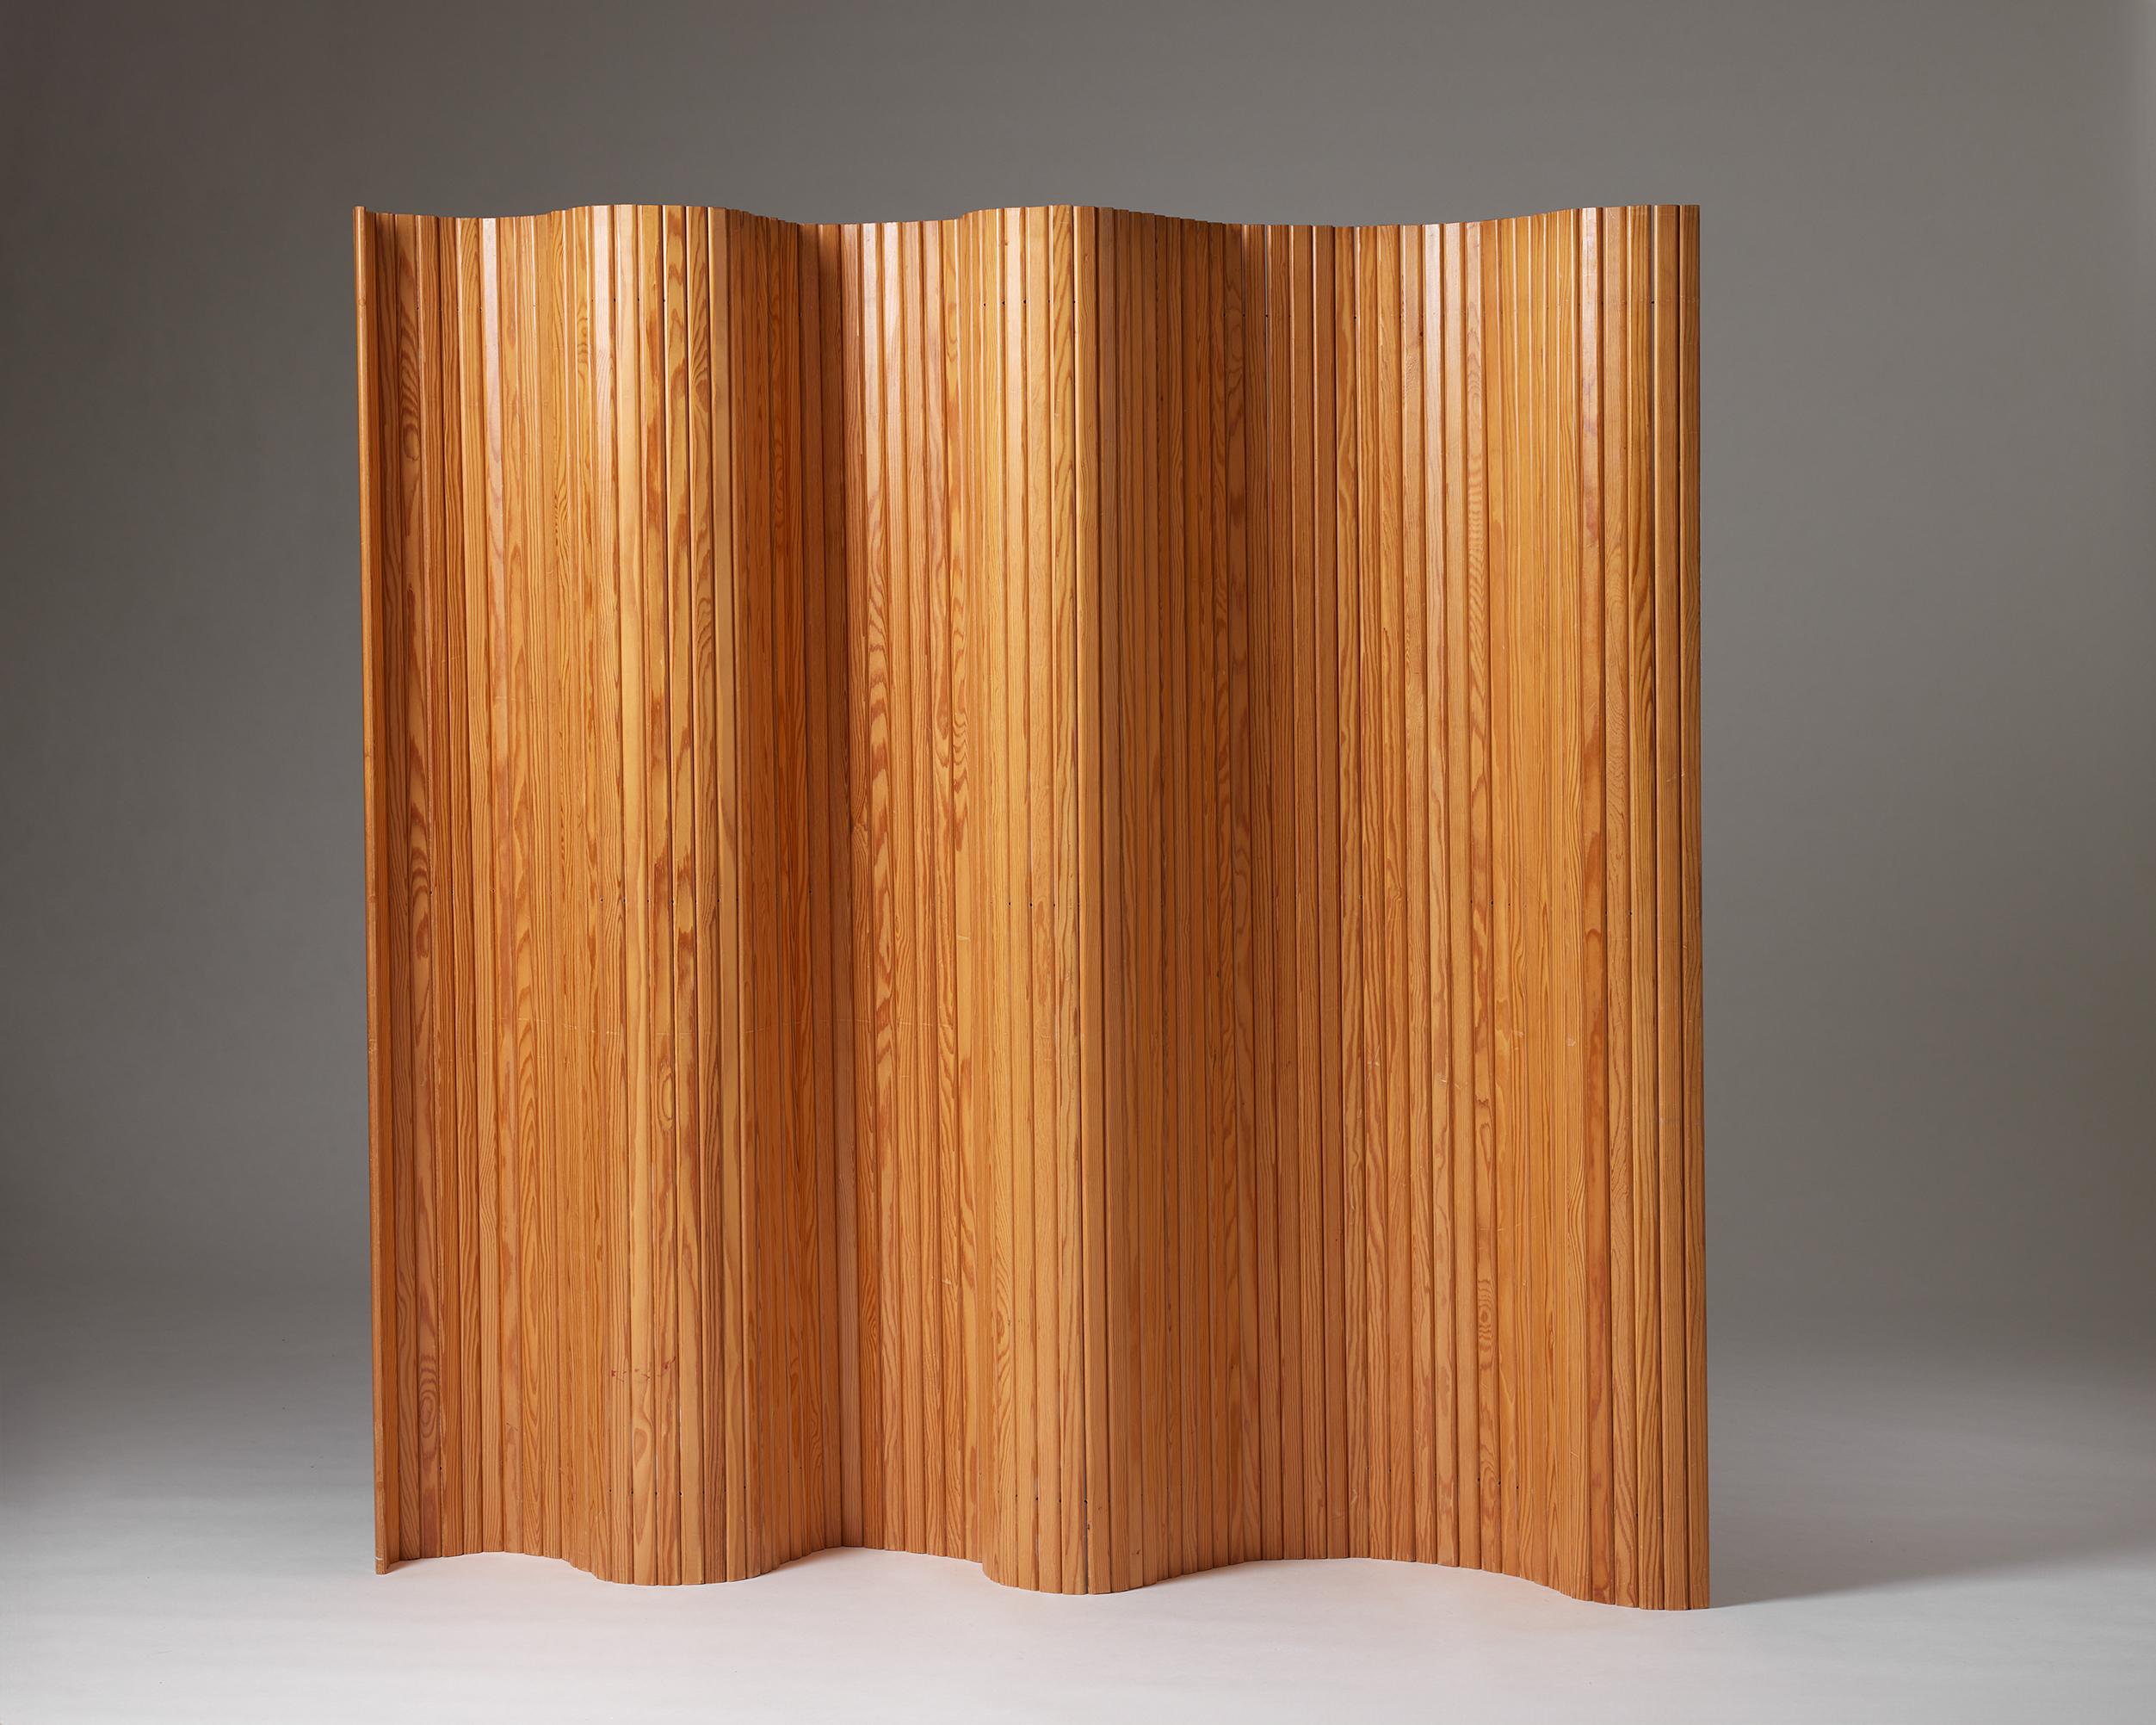 Folding 'Screen 100' designed by Alvar Aalto for Artek, Finland, 1936

Pine.

Alvar Aalto’s “Screen 100” designed in 1936 is a sculptural room divider made entirely of individual pine slats. This is the rarer long version of the design — the